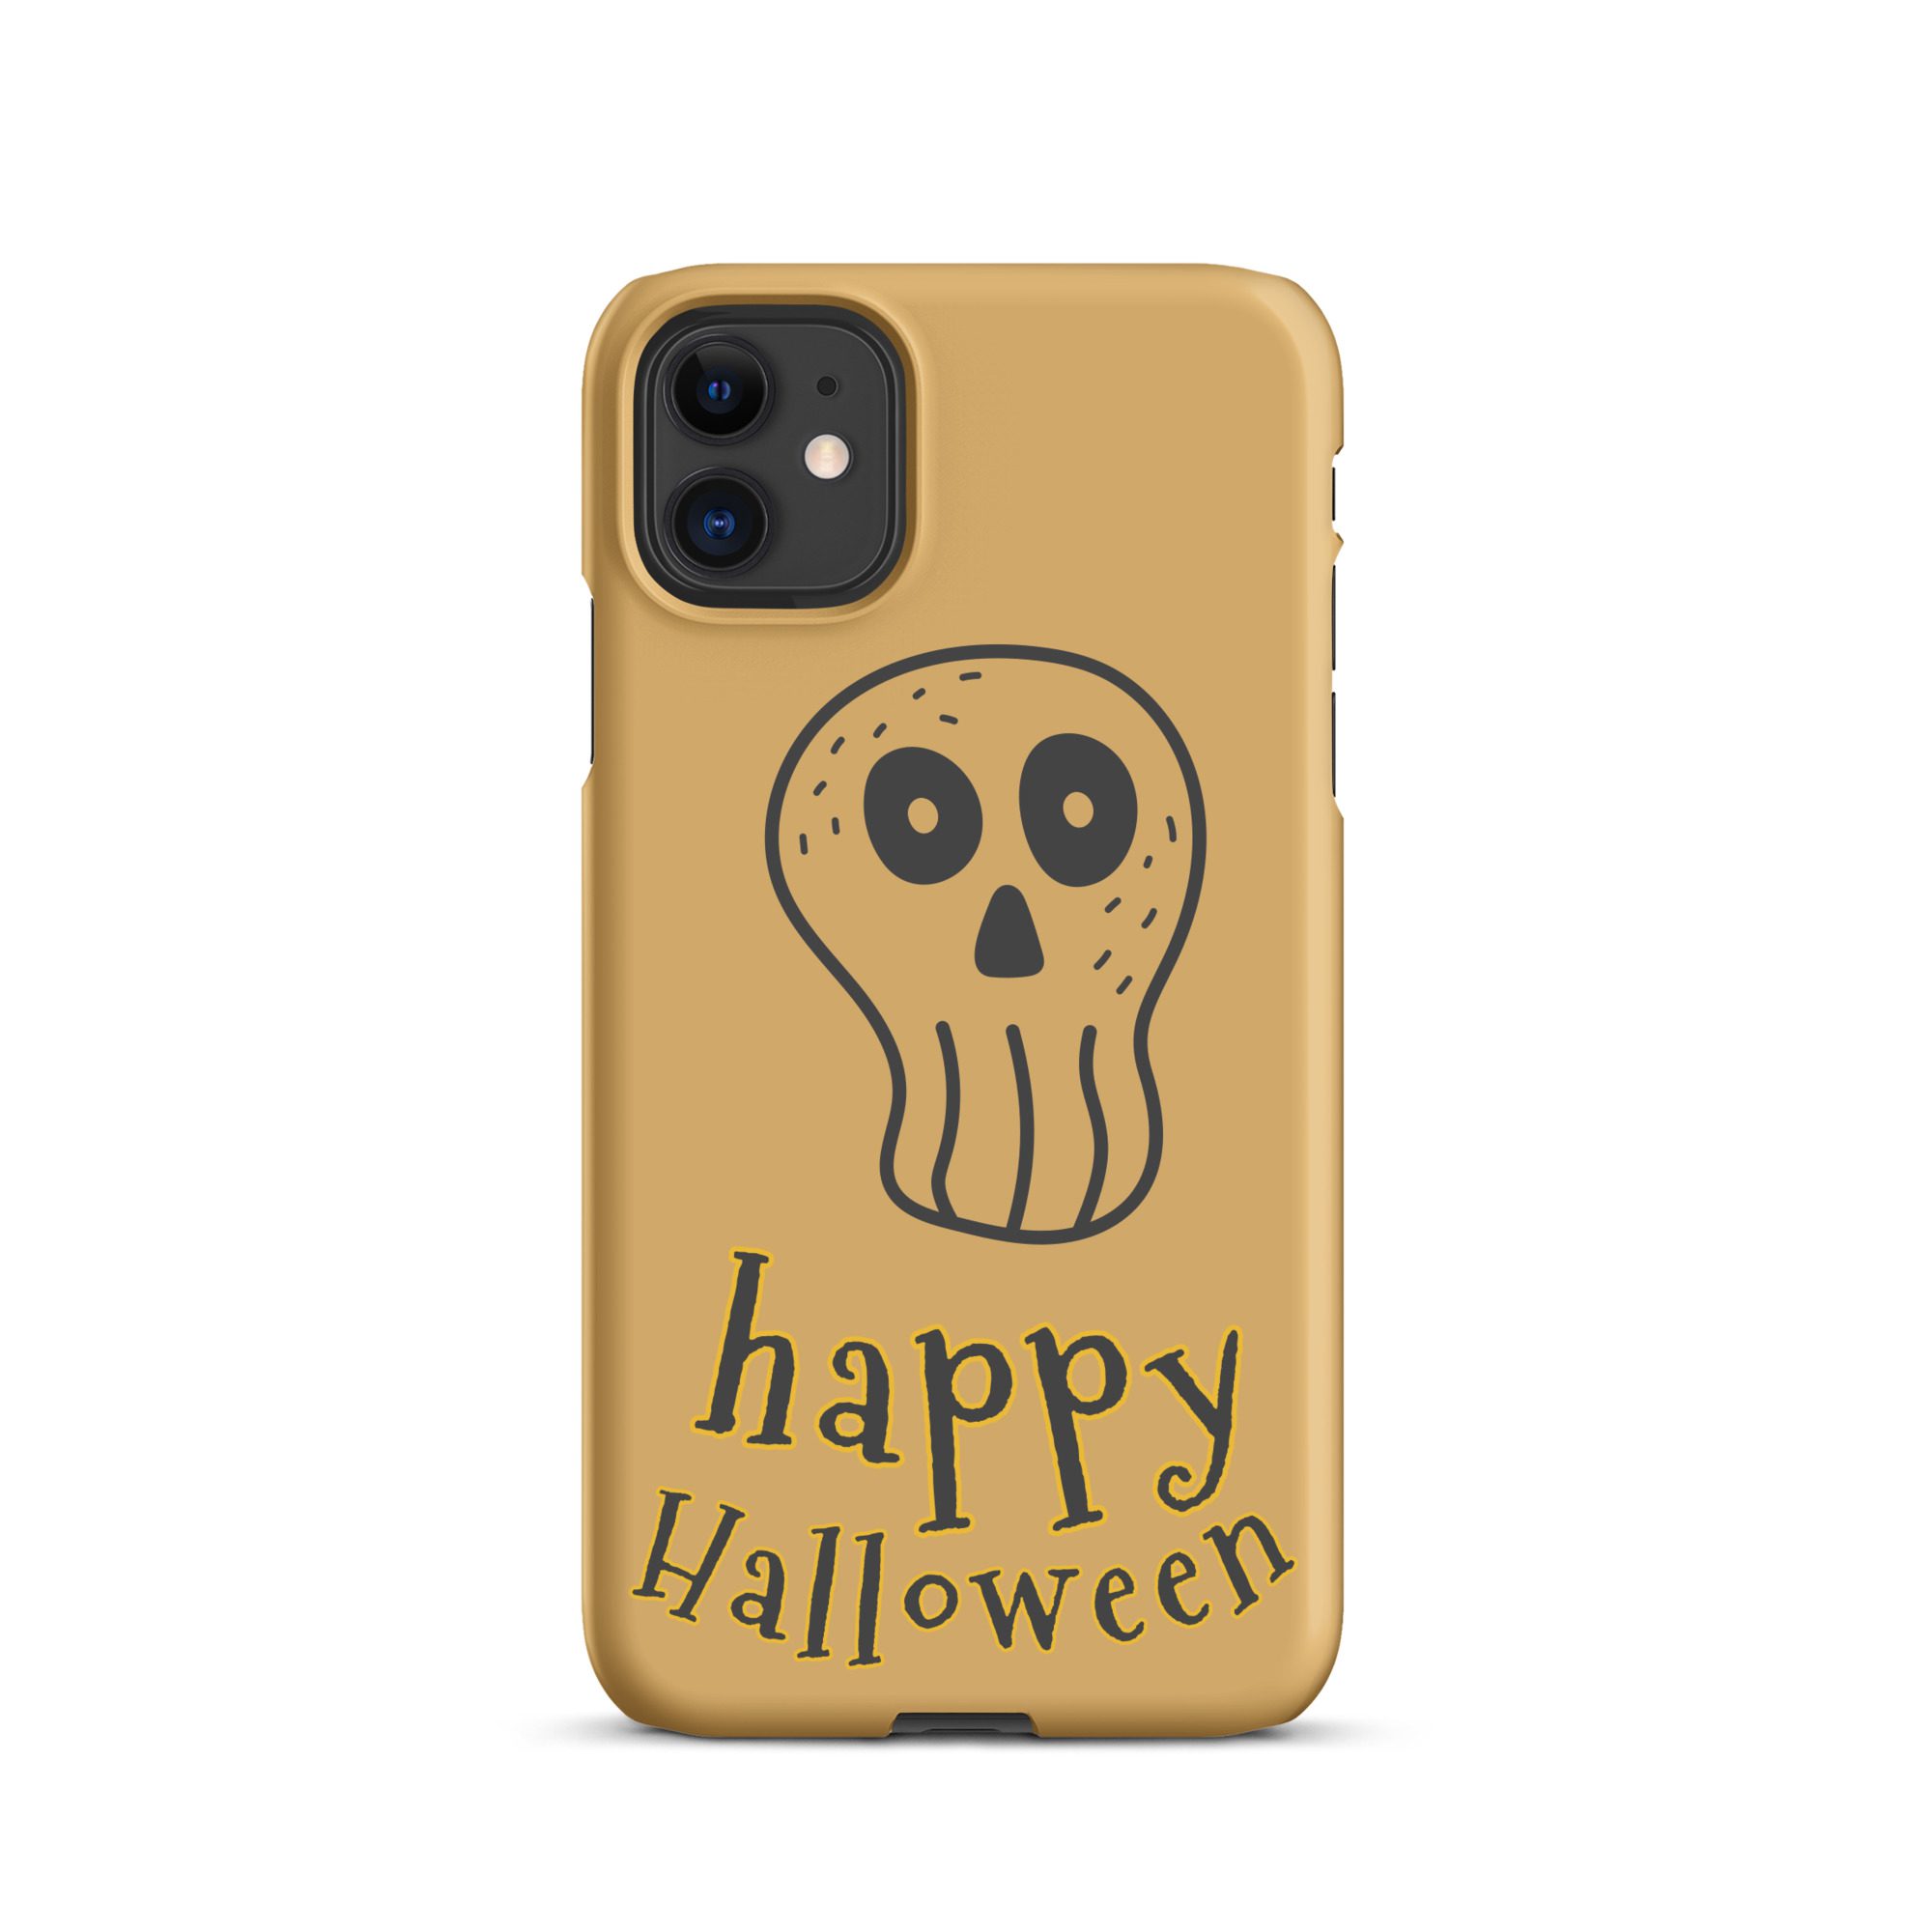 snap case for iphone matte iphone 11 front 6516d1684b346